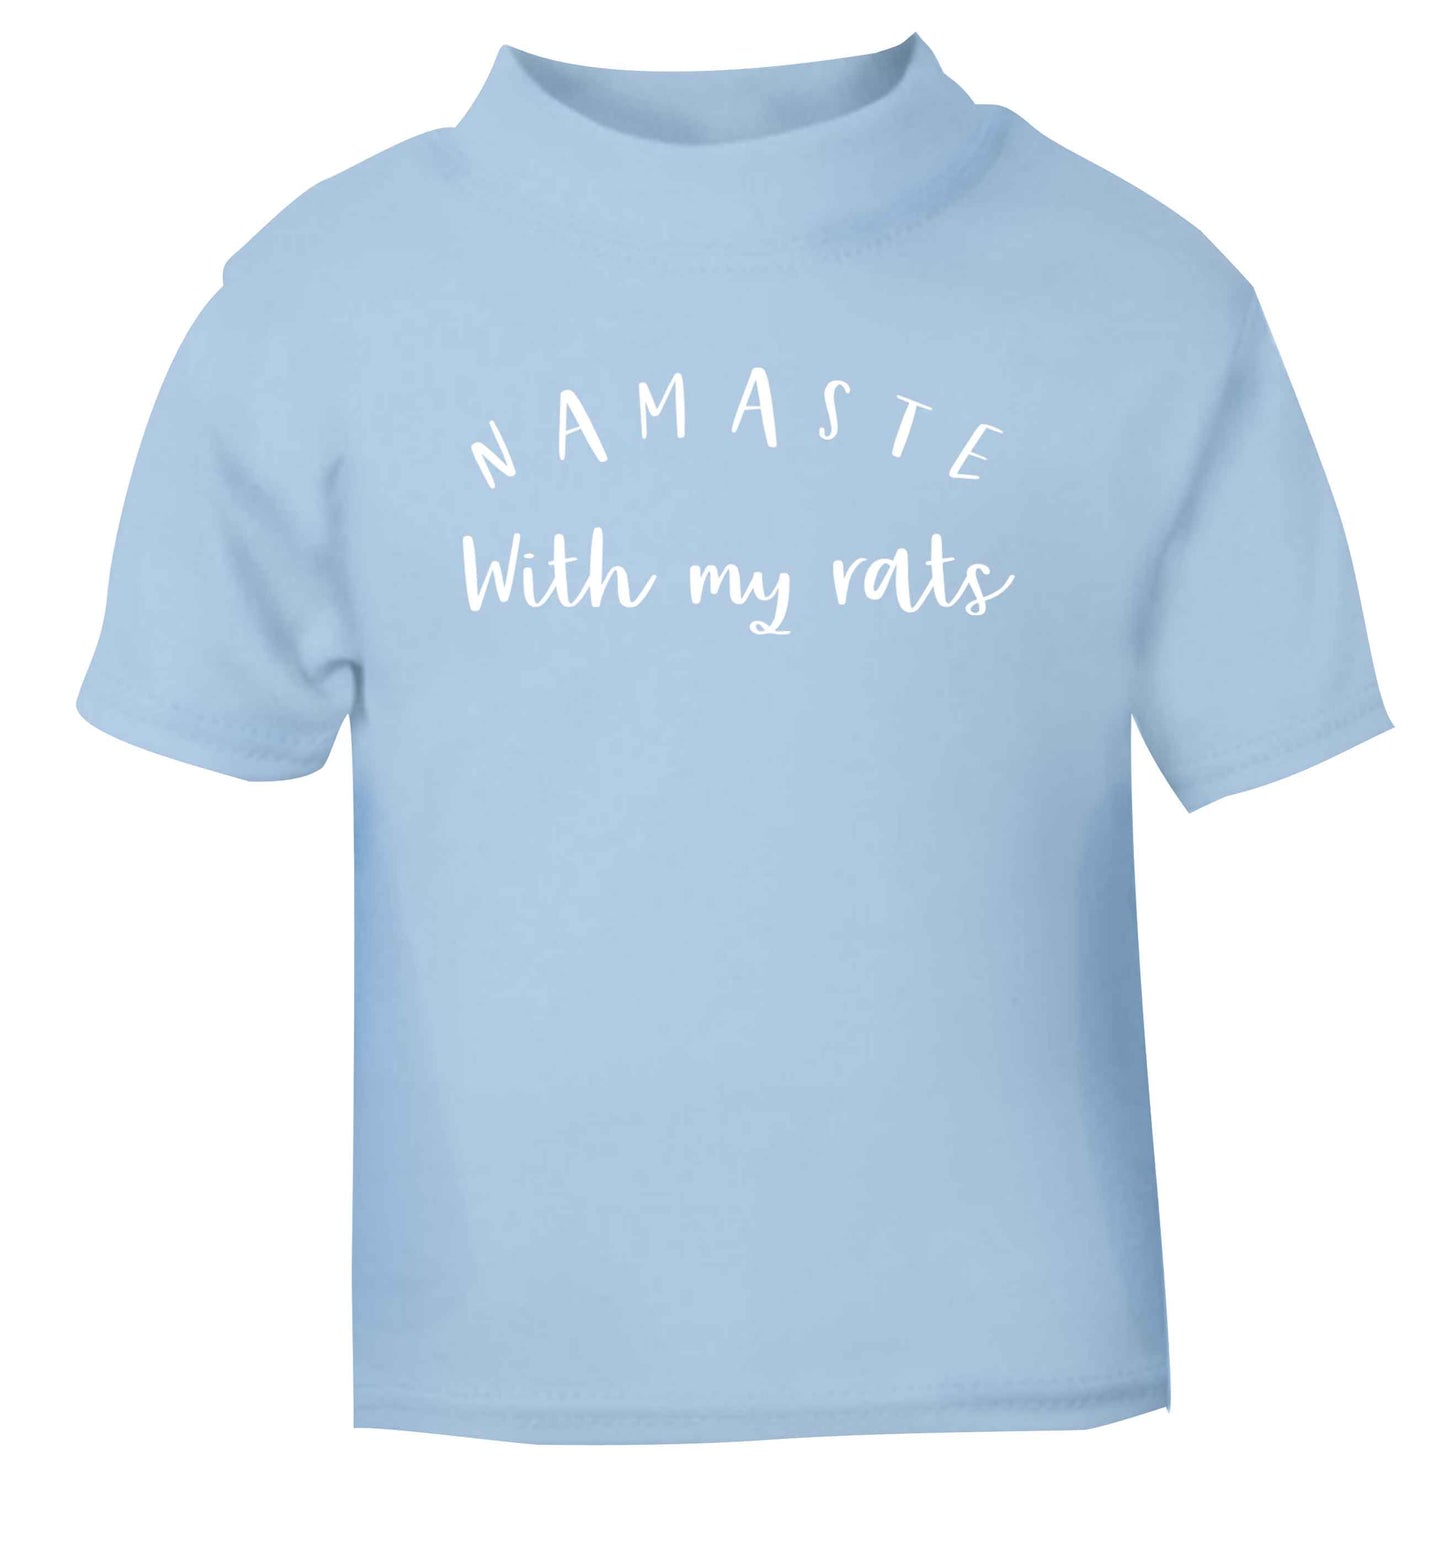 Namaste with my rats light blue Baby Toddler Tshirt 2 Years